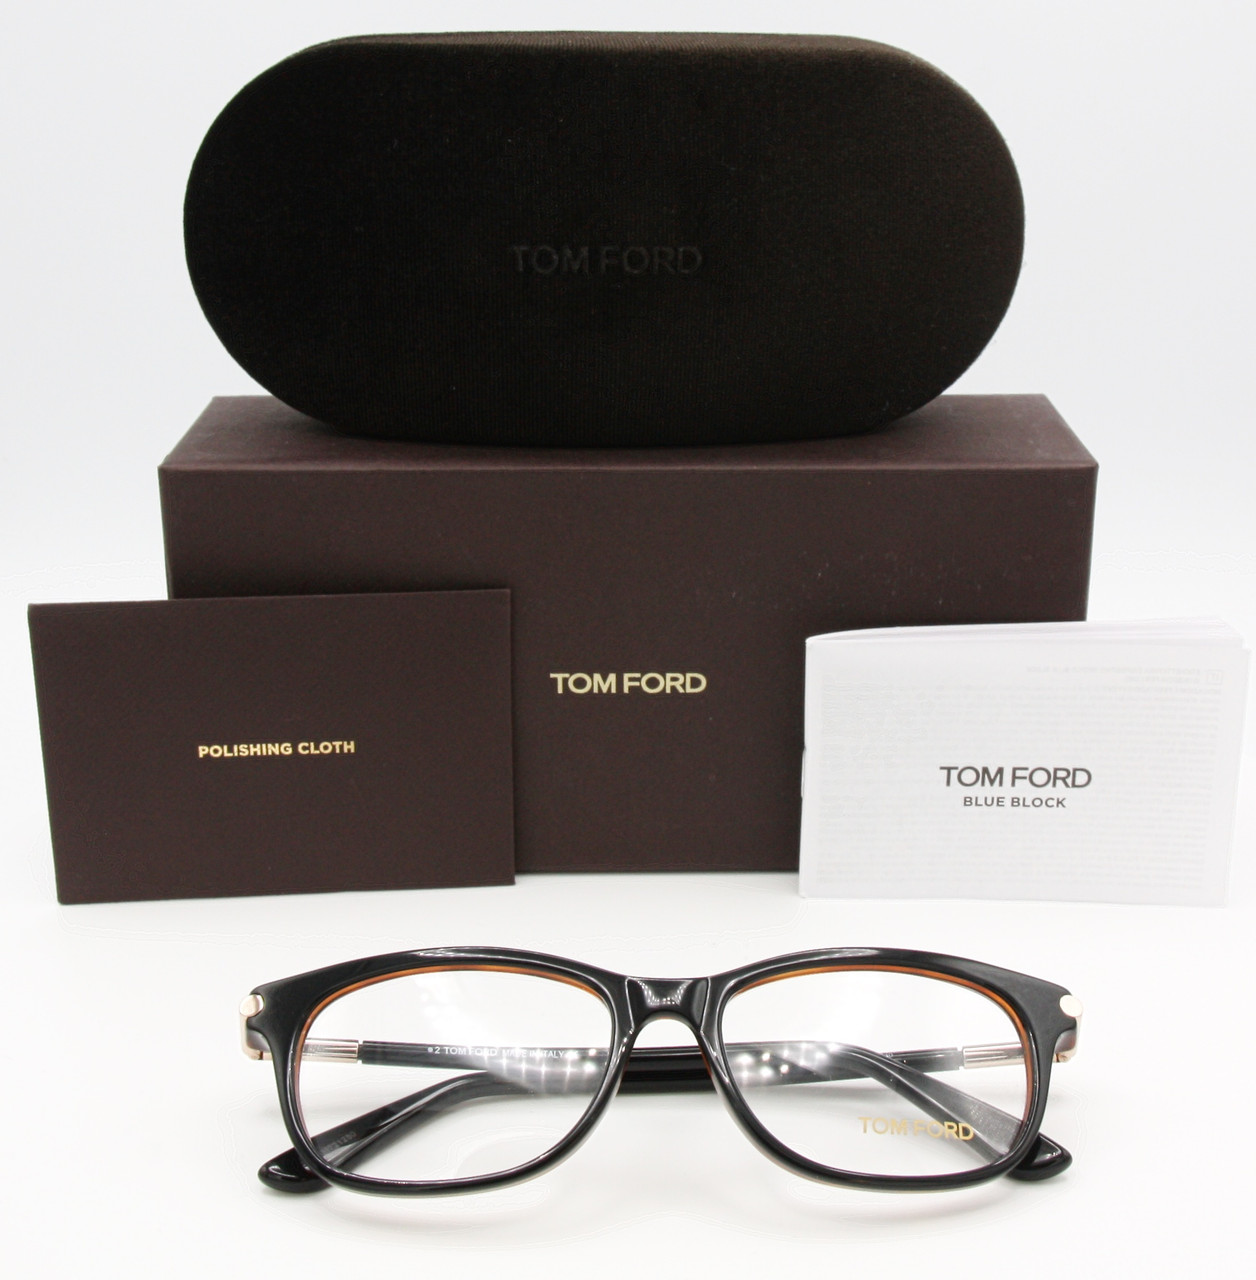 Two Tone Rectangular Eyeglasses By Tom Ford 5237 Spectacles In A Black & Tortoiseshell Acetate Finish  52mm Eye Size